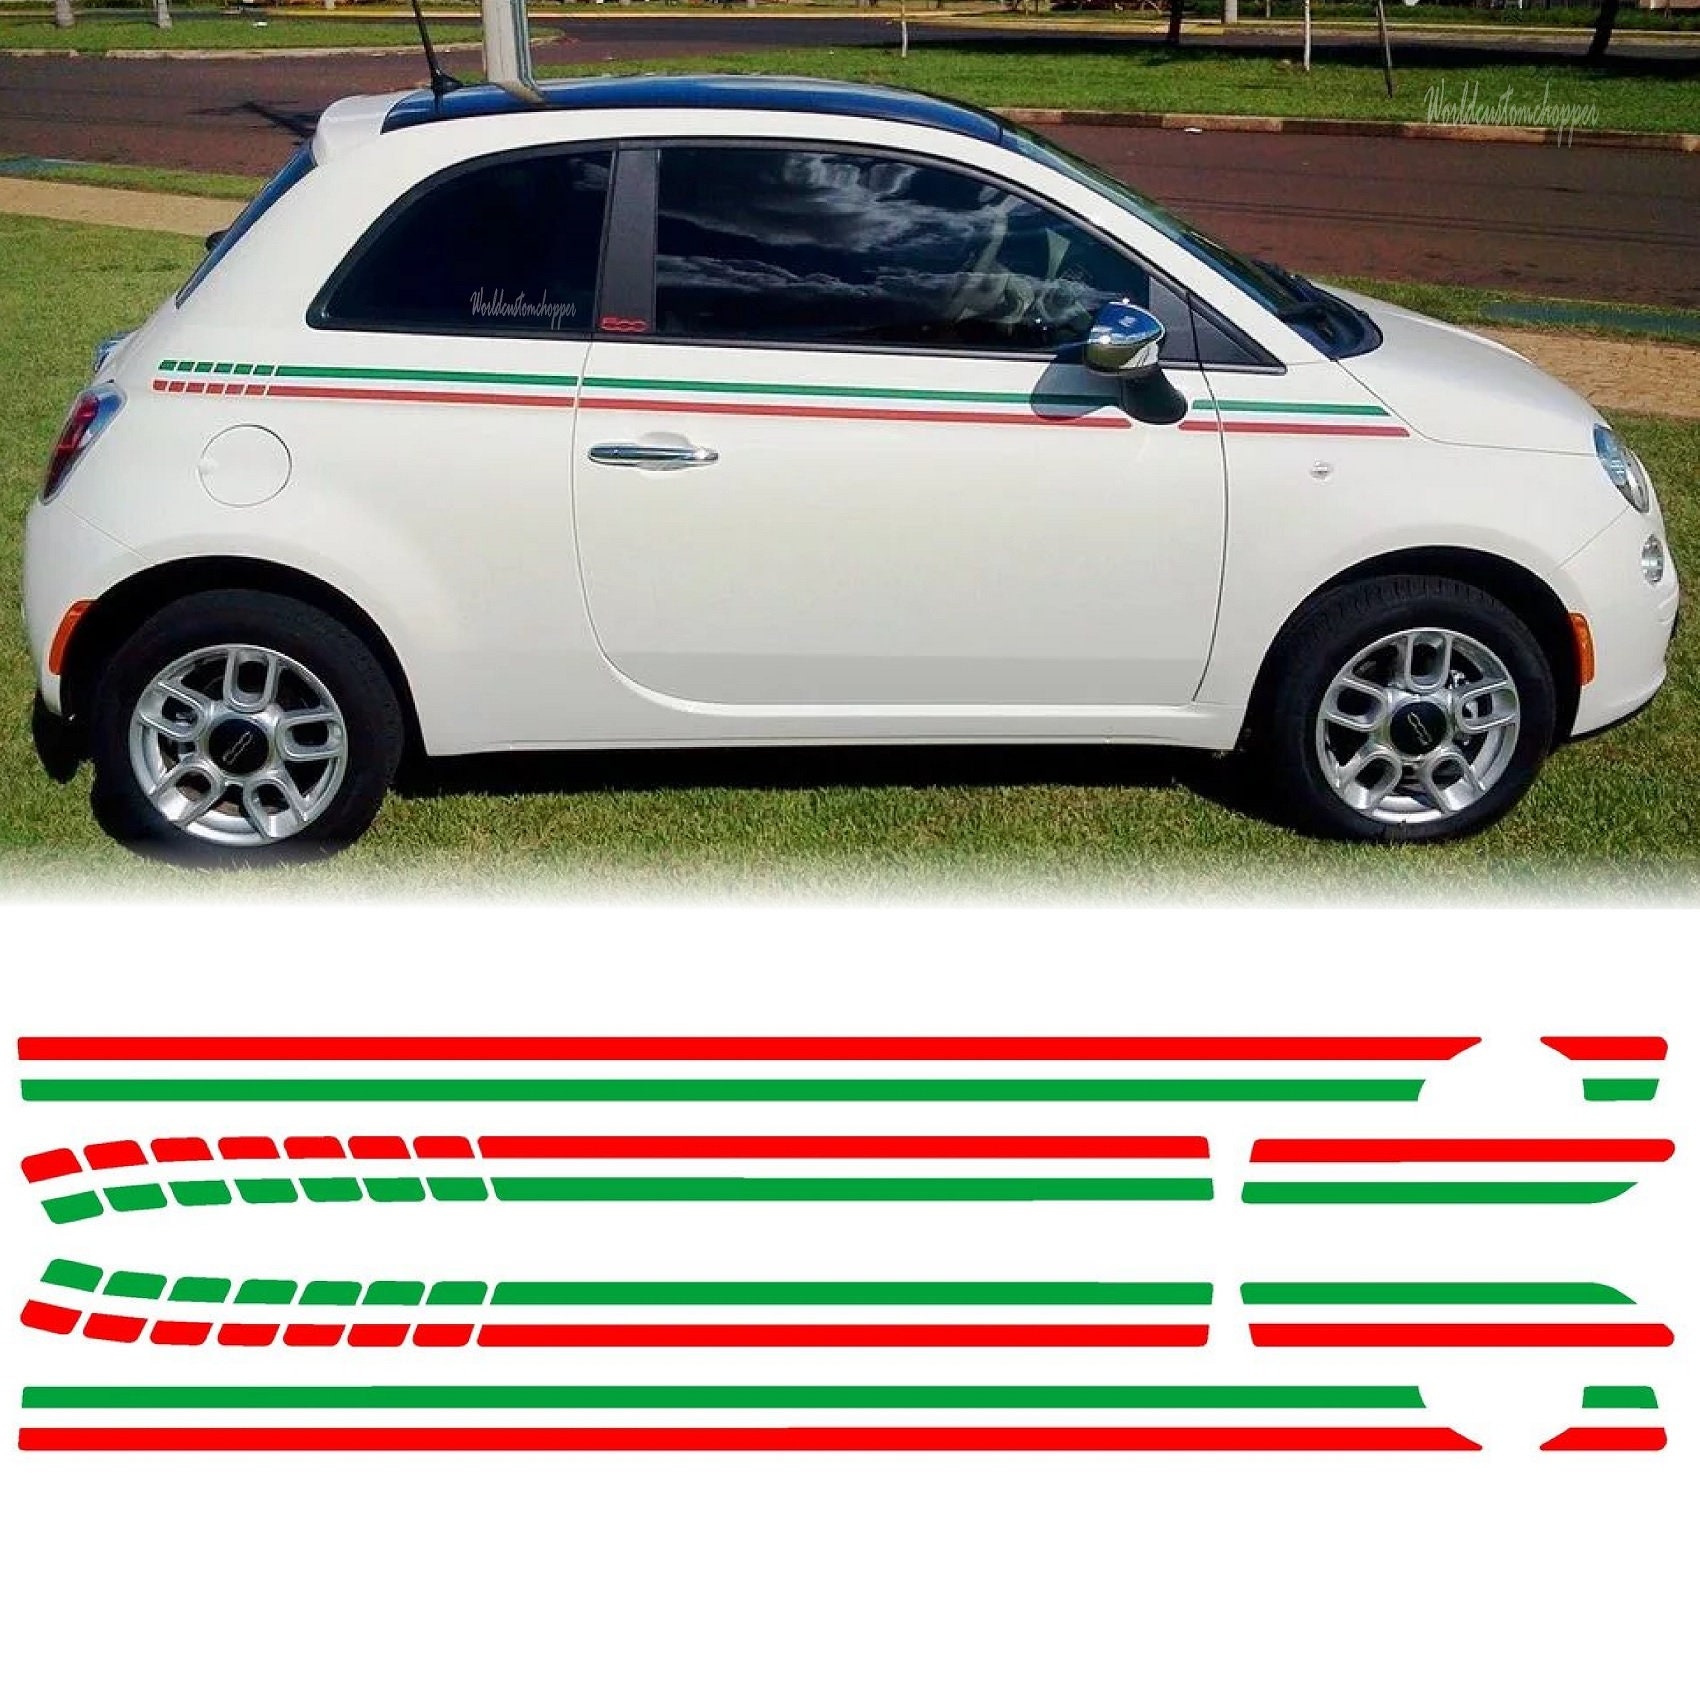 Stickers Stickers side bands for Fiat 500 Sport stickers auto tuning strips